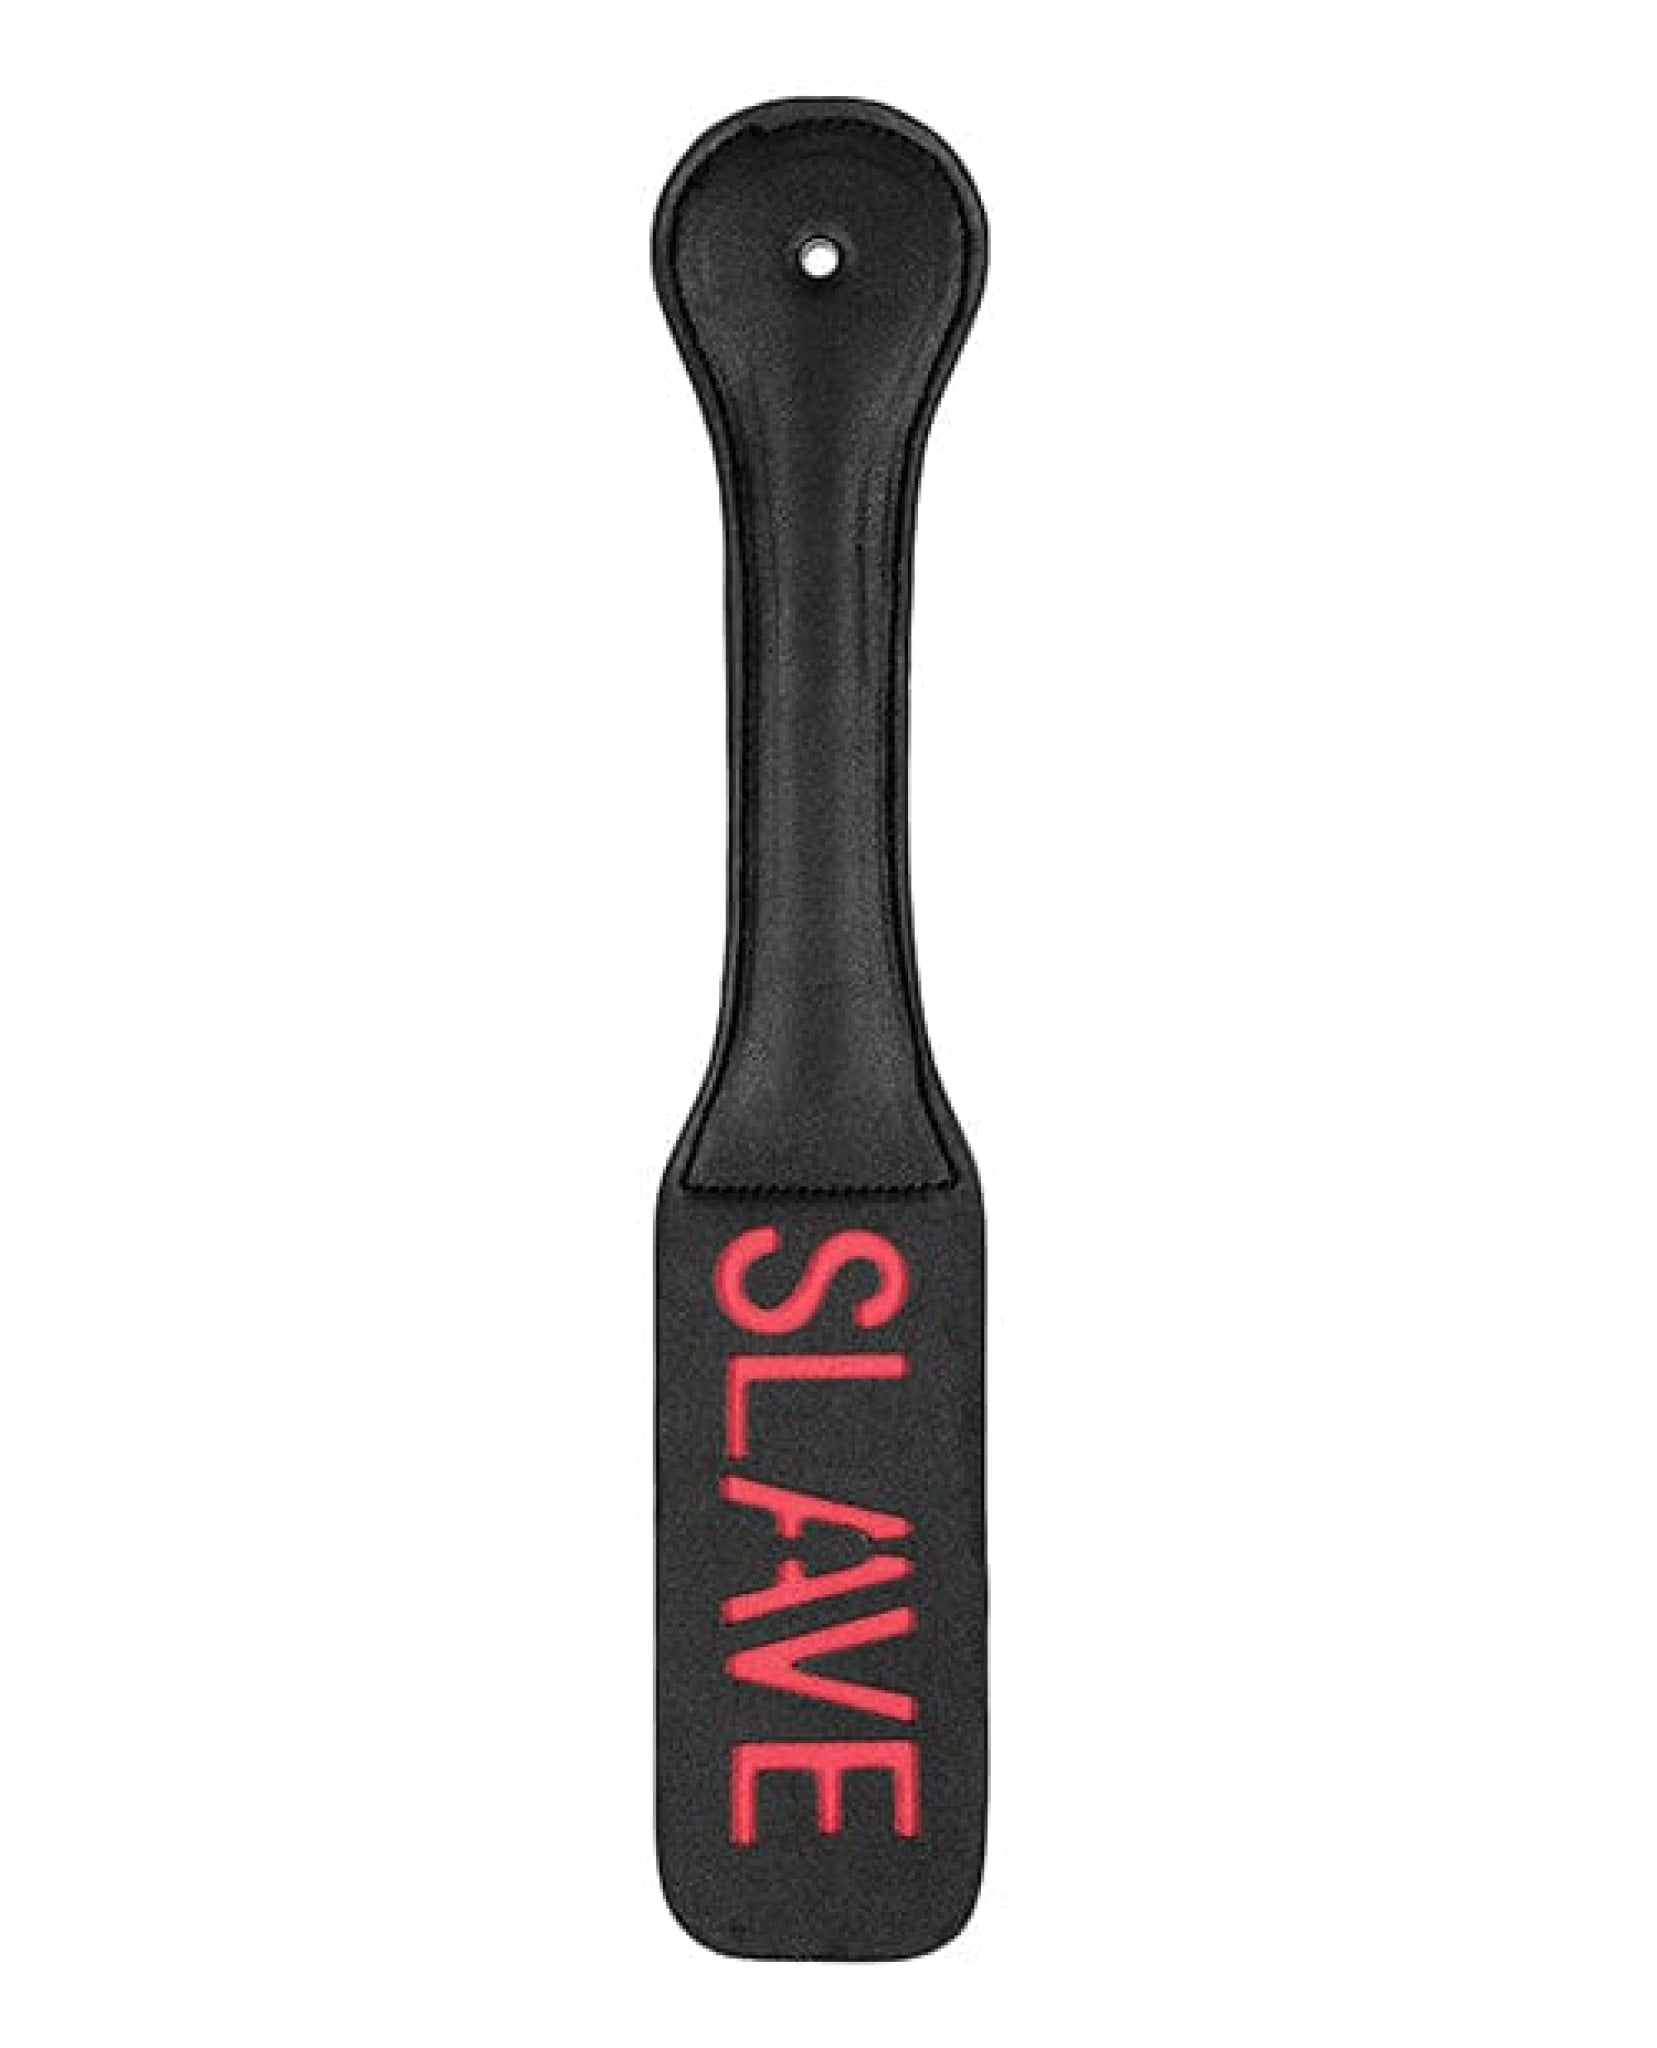 Shots Ouch Slave Paddle - Black